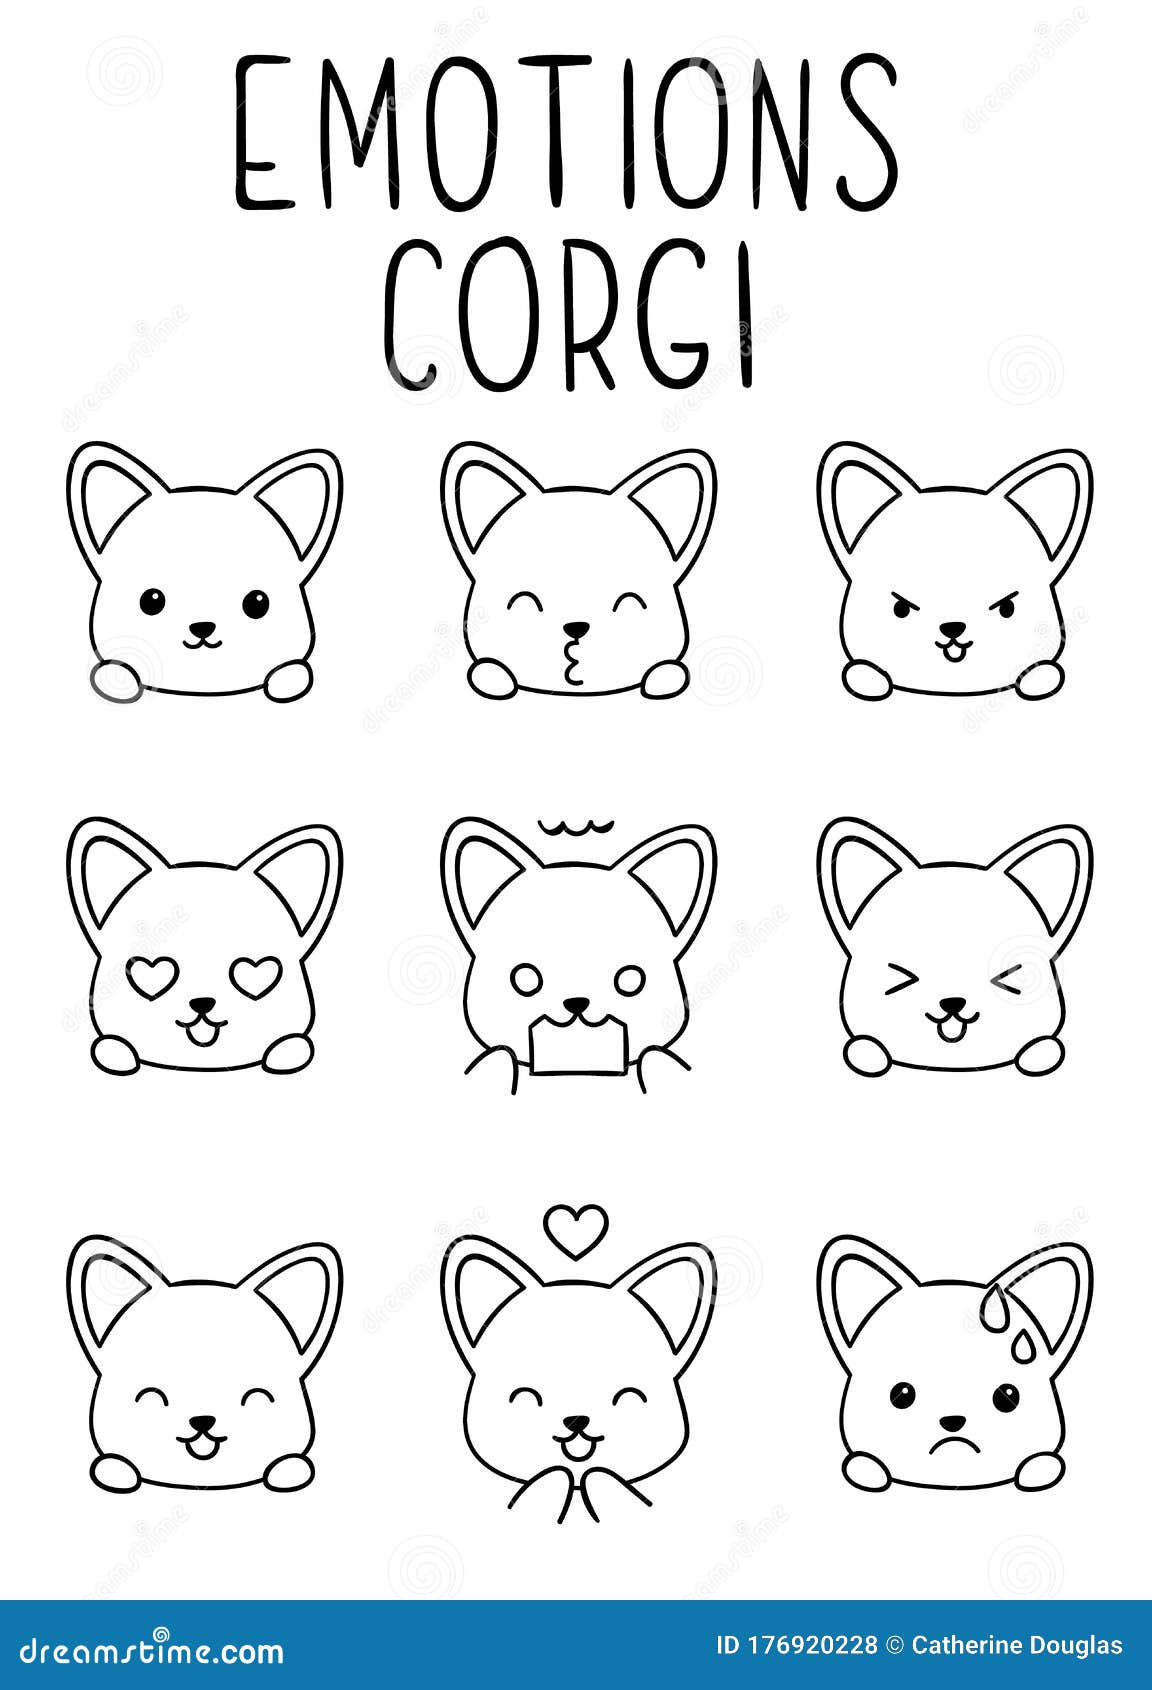 Coloring Pages, Black and White Cute Kawaii Hand Drawn Emotions ...